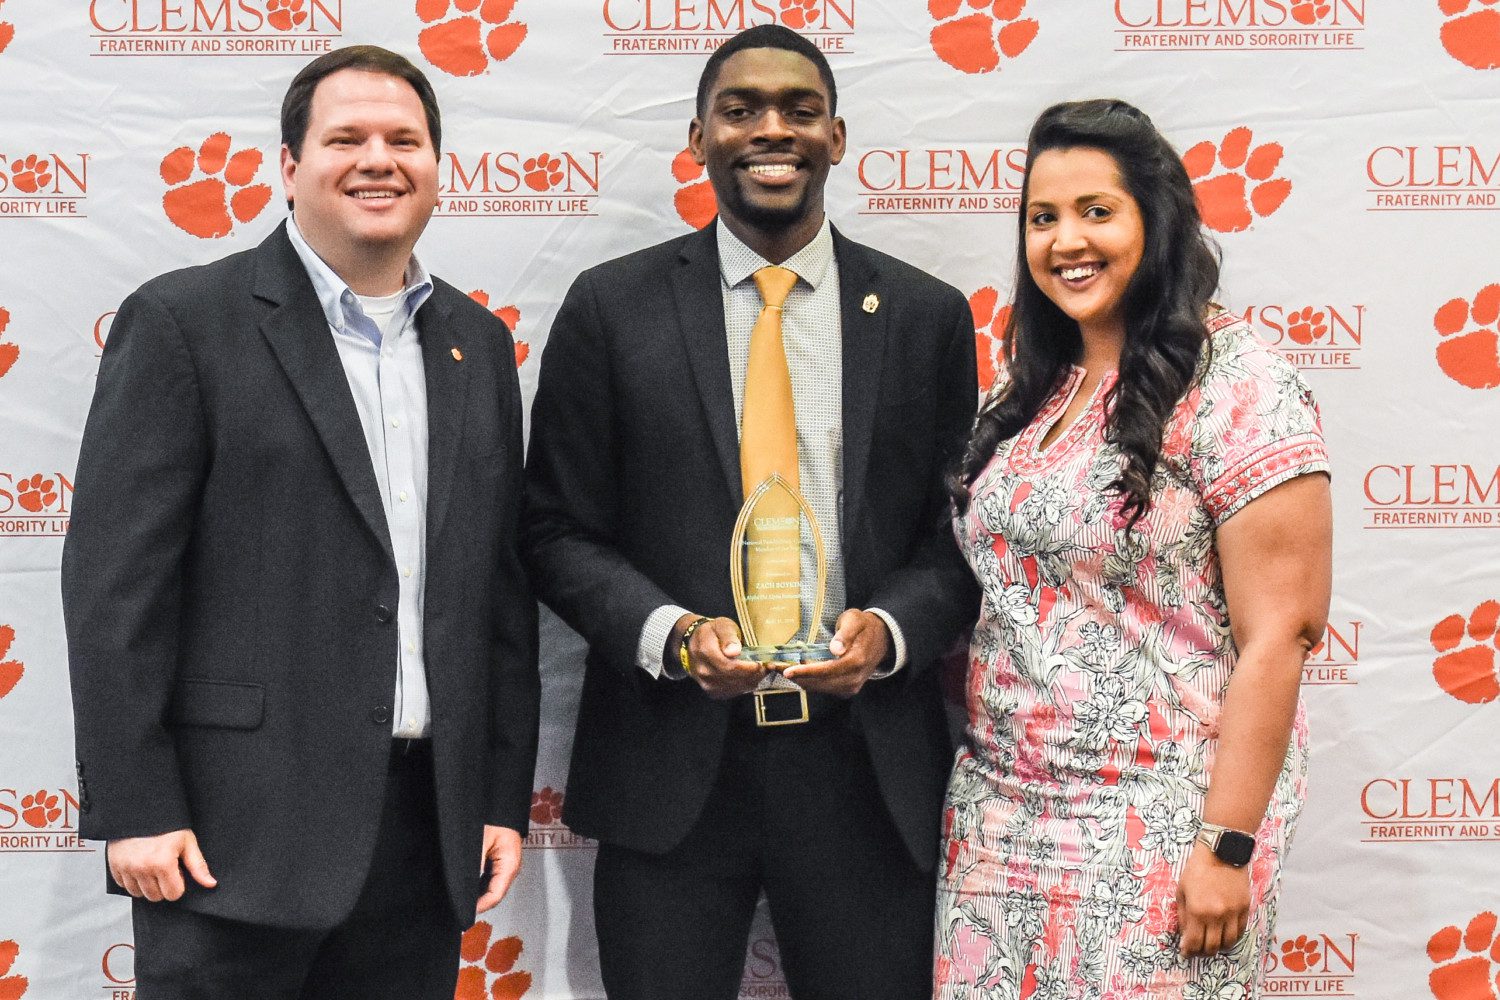 (L-R) Gary Wiser, Zach Boykin and Trish Robinson at the 2019 Fraternity and Sorority Life awards reception.